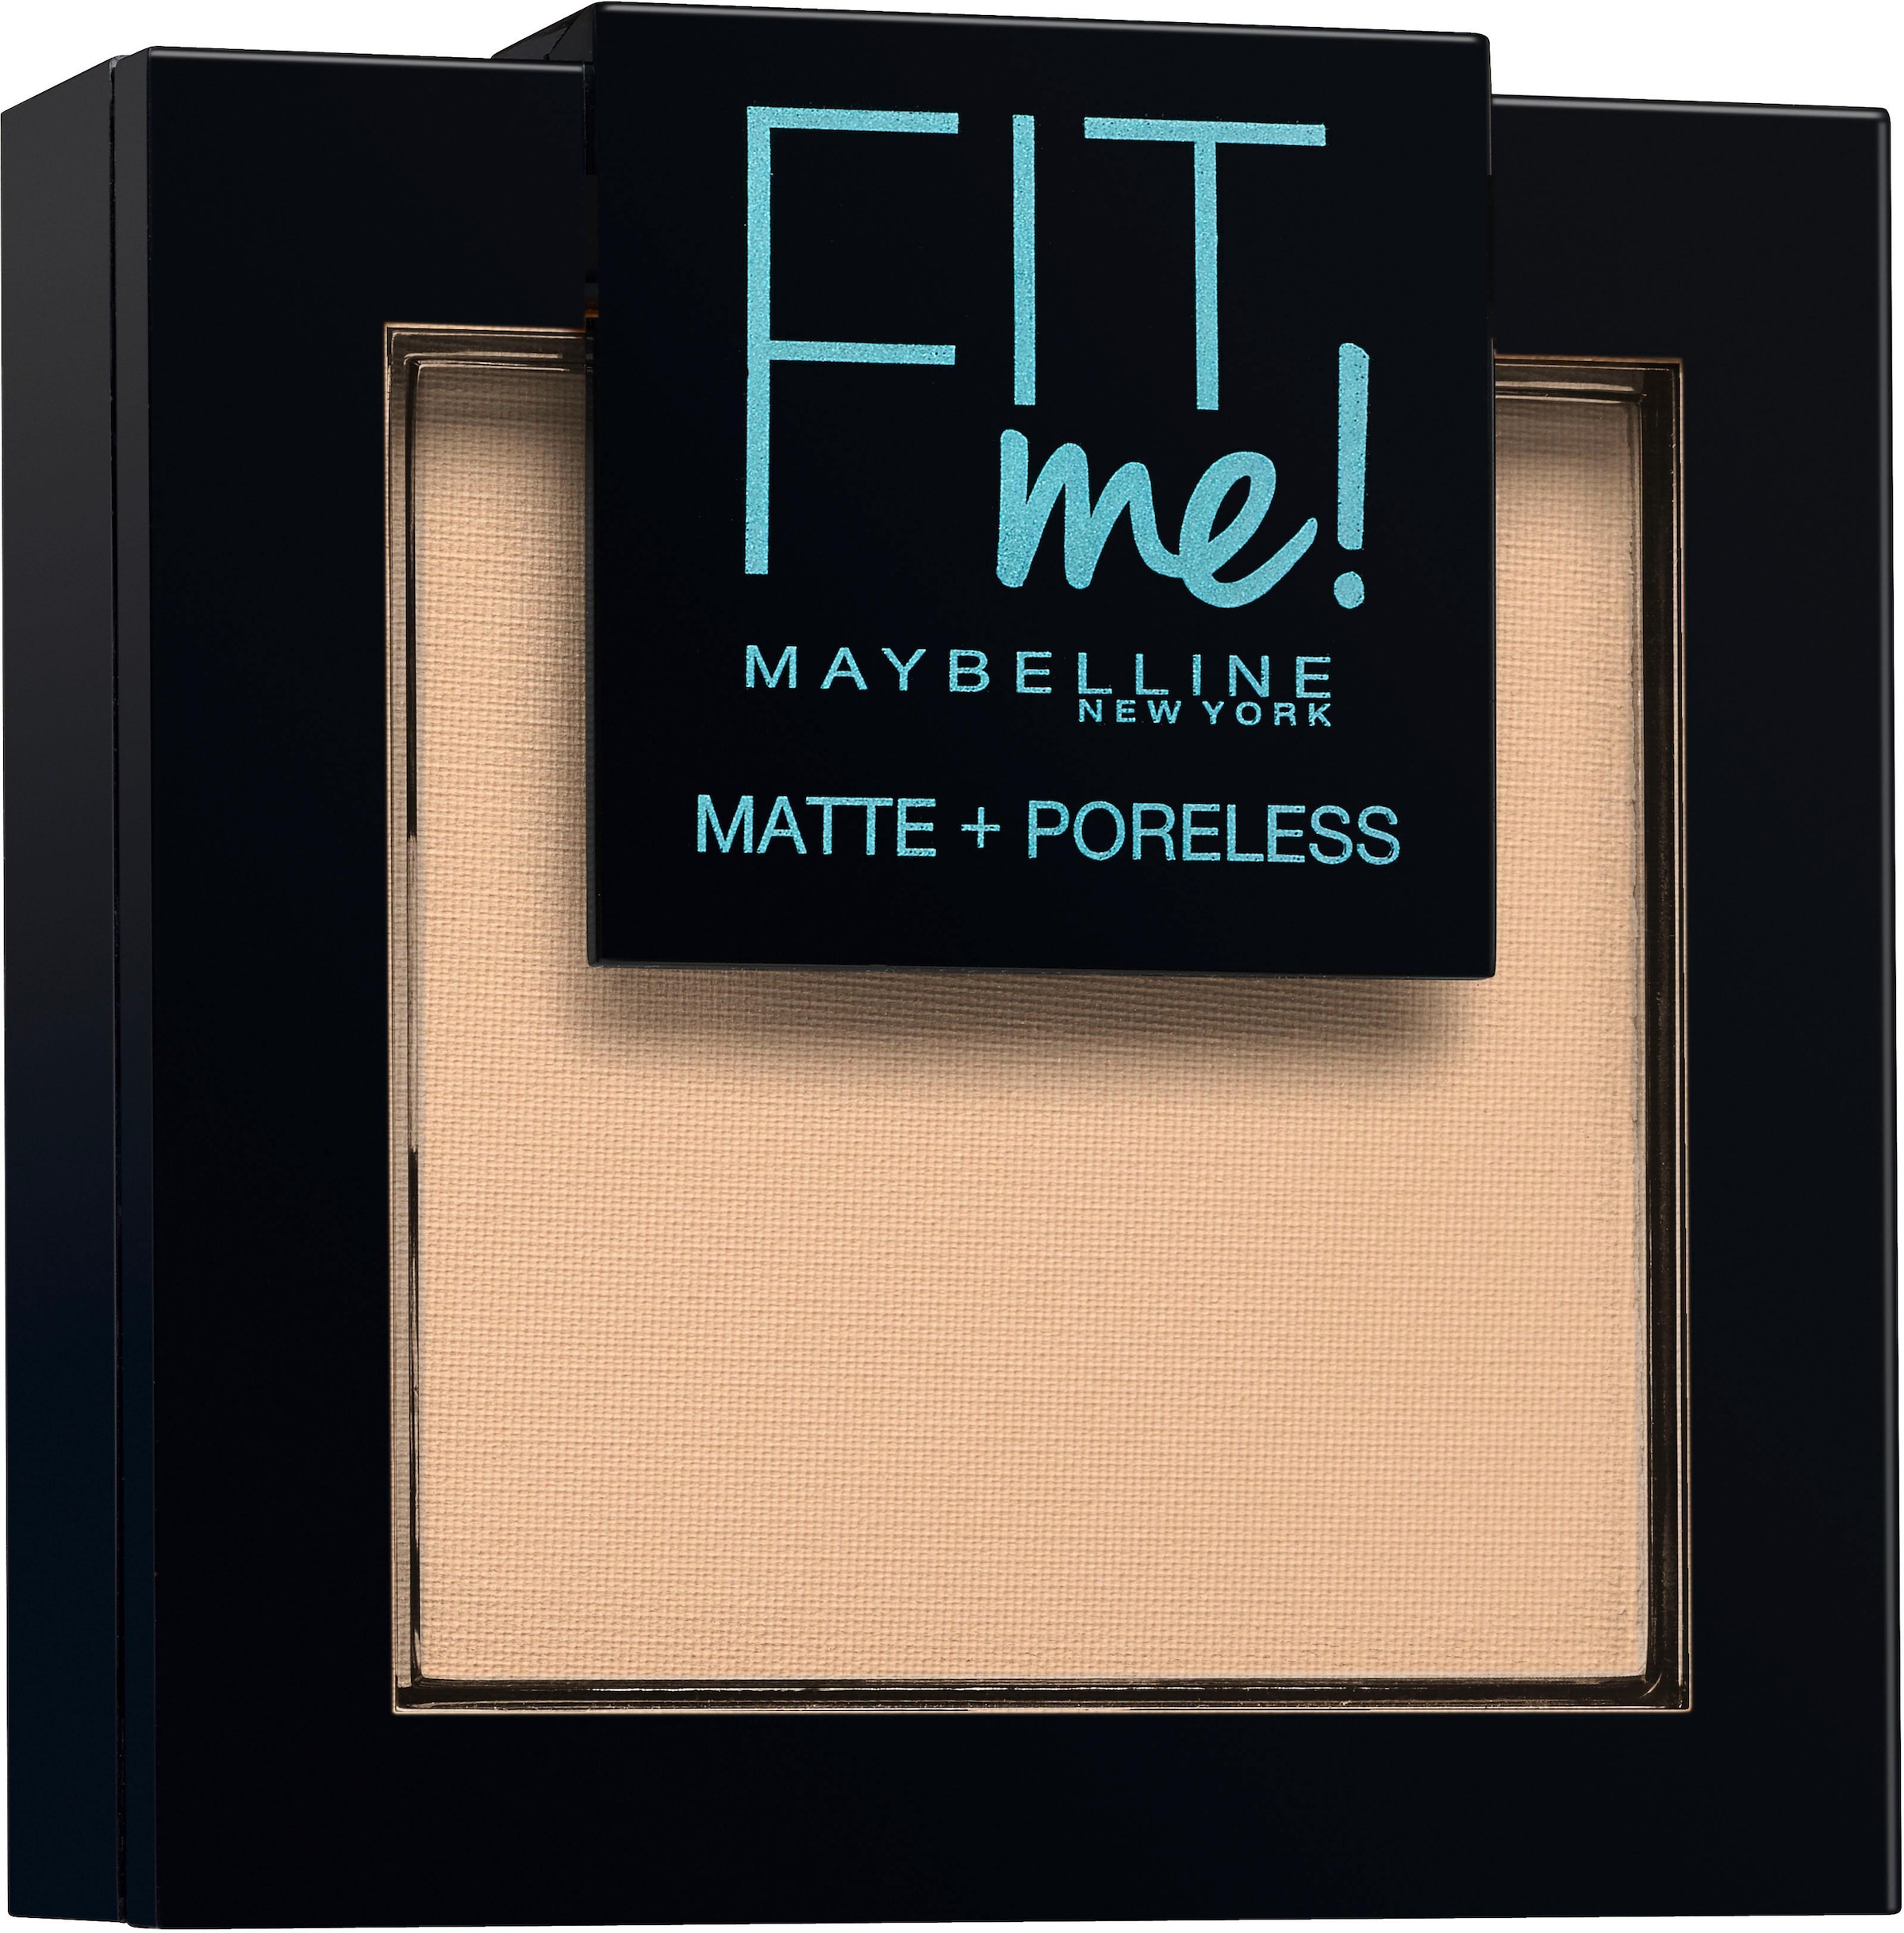 MAYBELLINE NEW YORK bei Matte Puder OTTO & »FIT online Poreless« ME